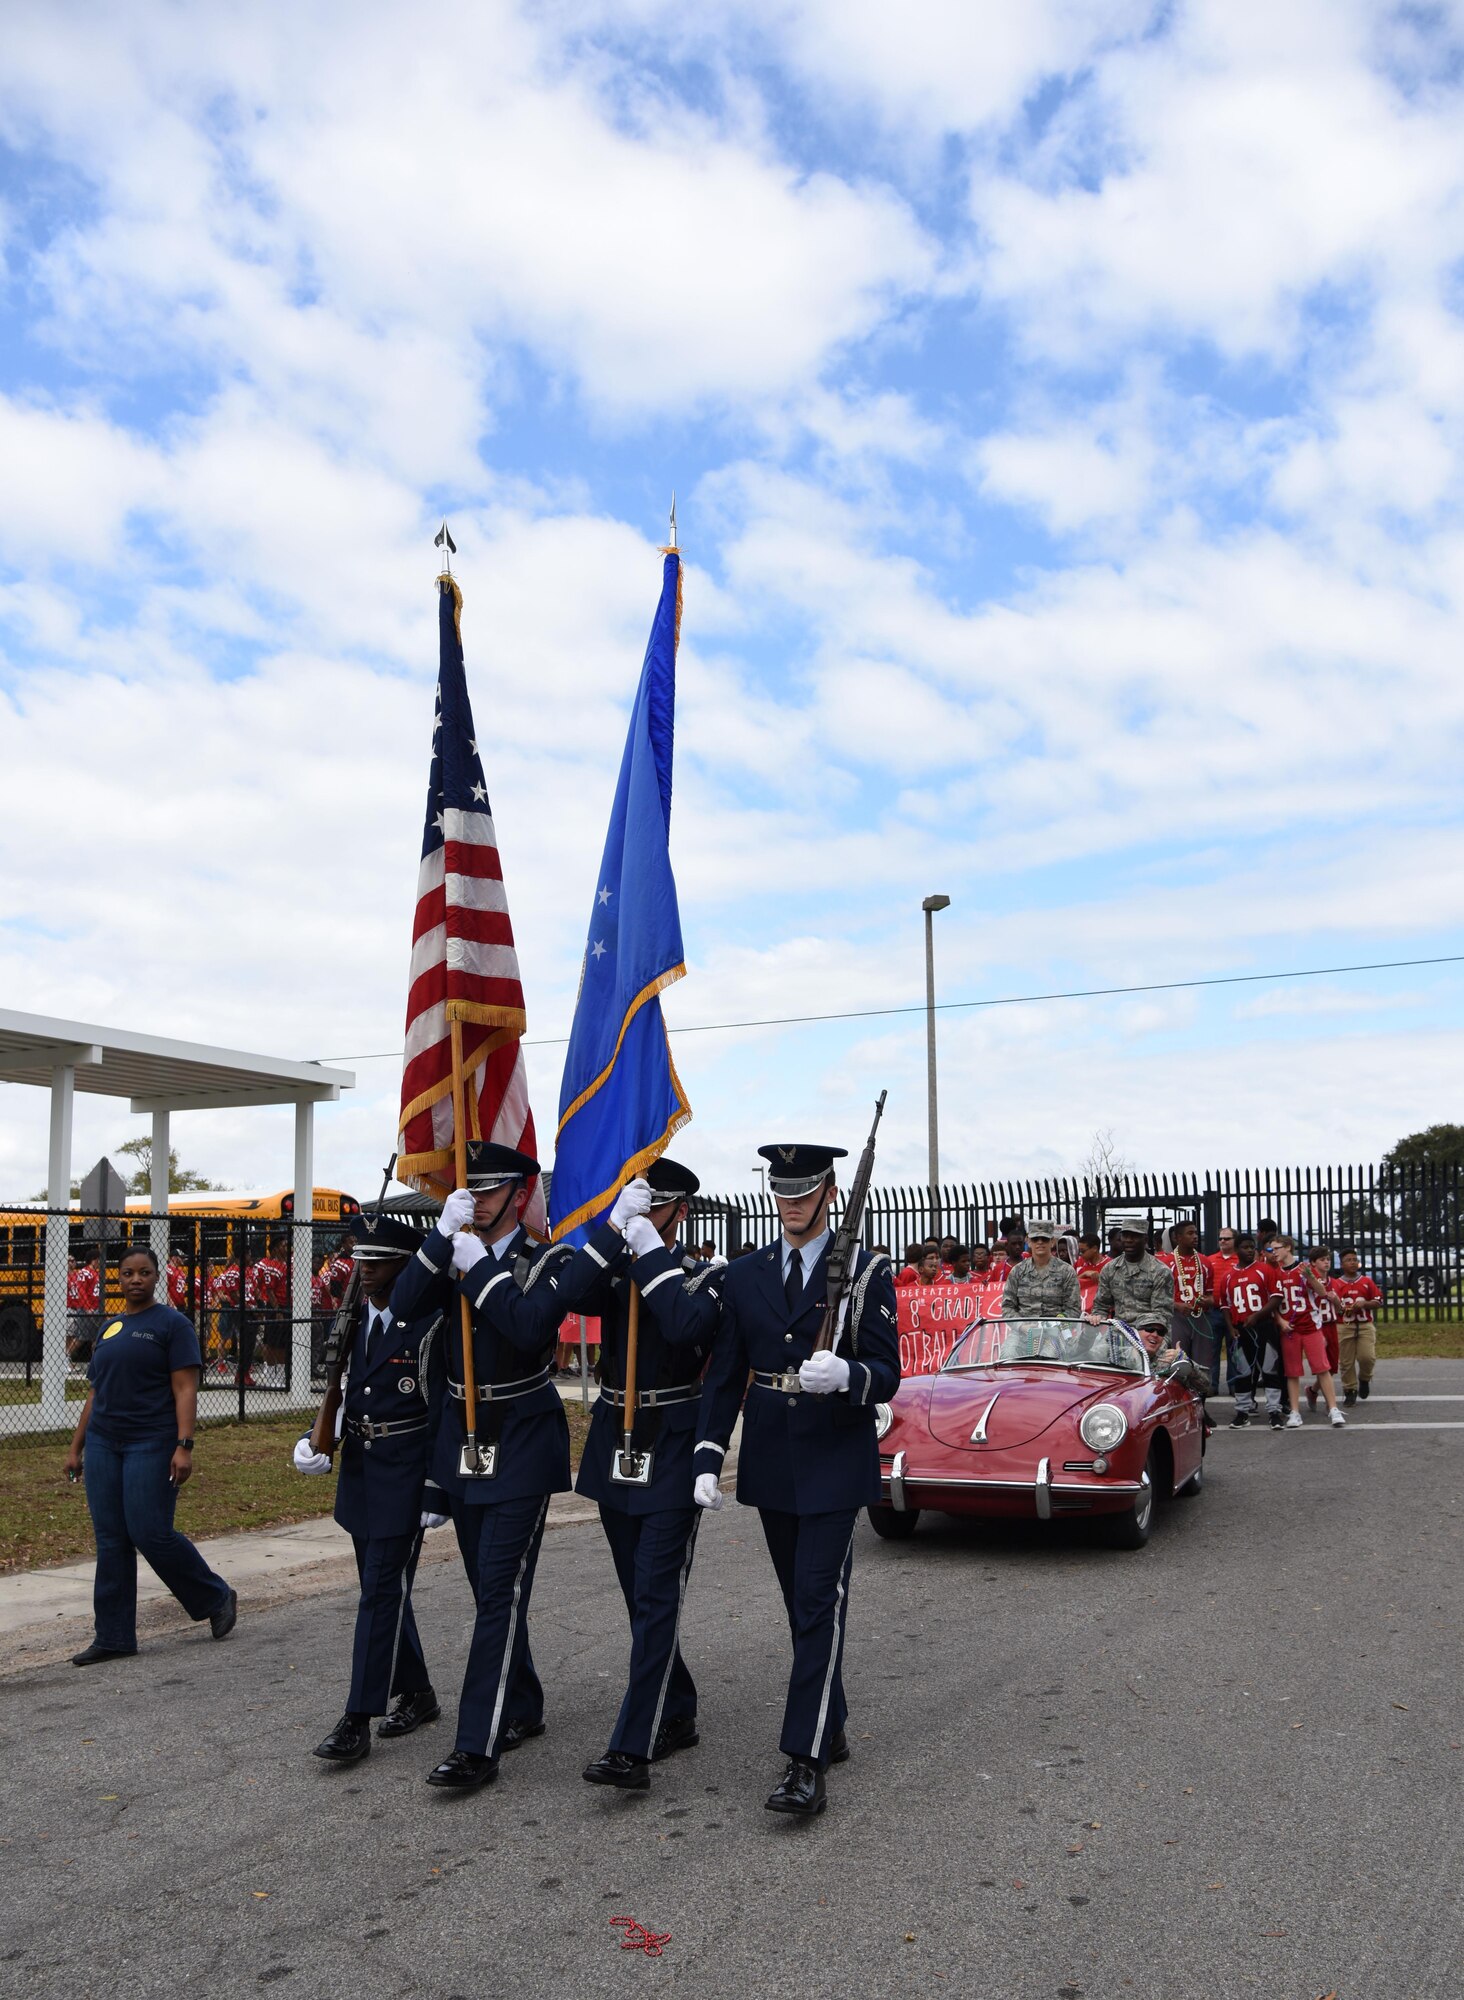 Members of the Keesler Air Force Base Honor Guard lead the Jeff Davis Elementary School Mardi Gras Parade, Feb. 24, 2017, Biloxi, Miss. Keesler leadership and other base personnel also participated in the festivities. (U.S. Air Force photo by Kemberly Groue)